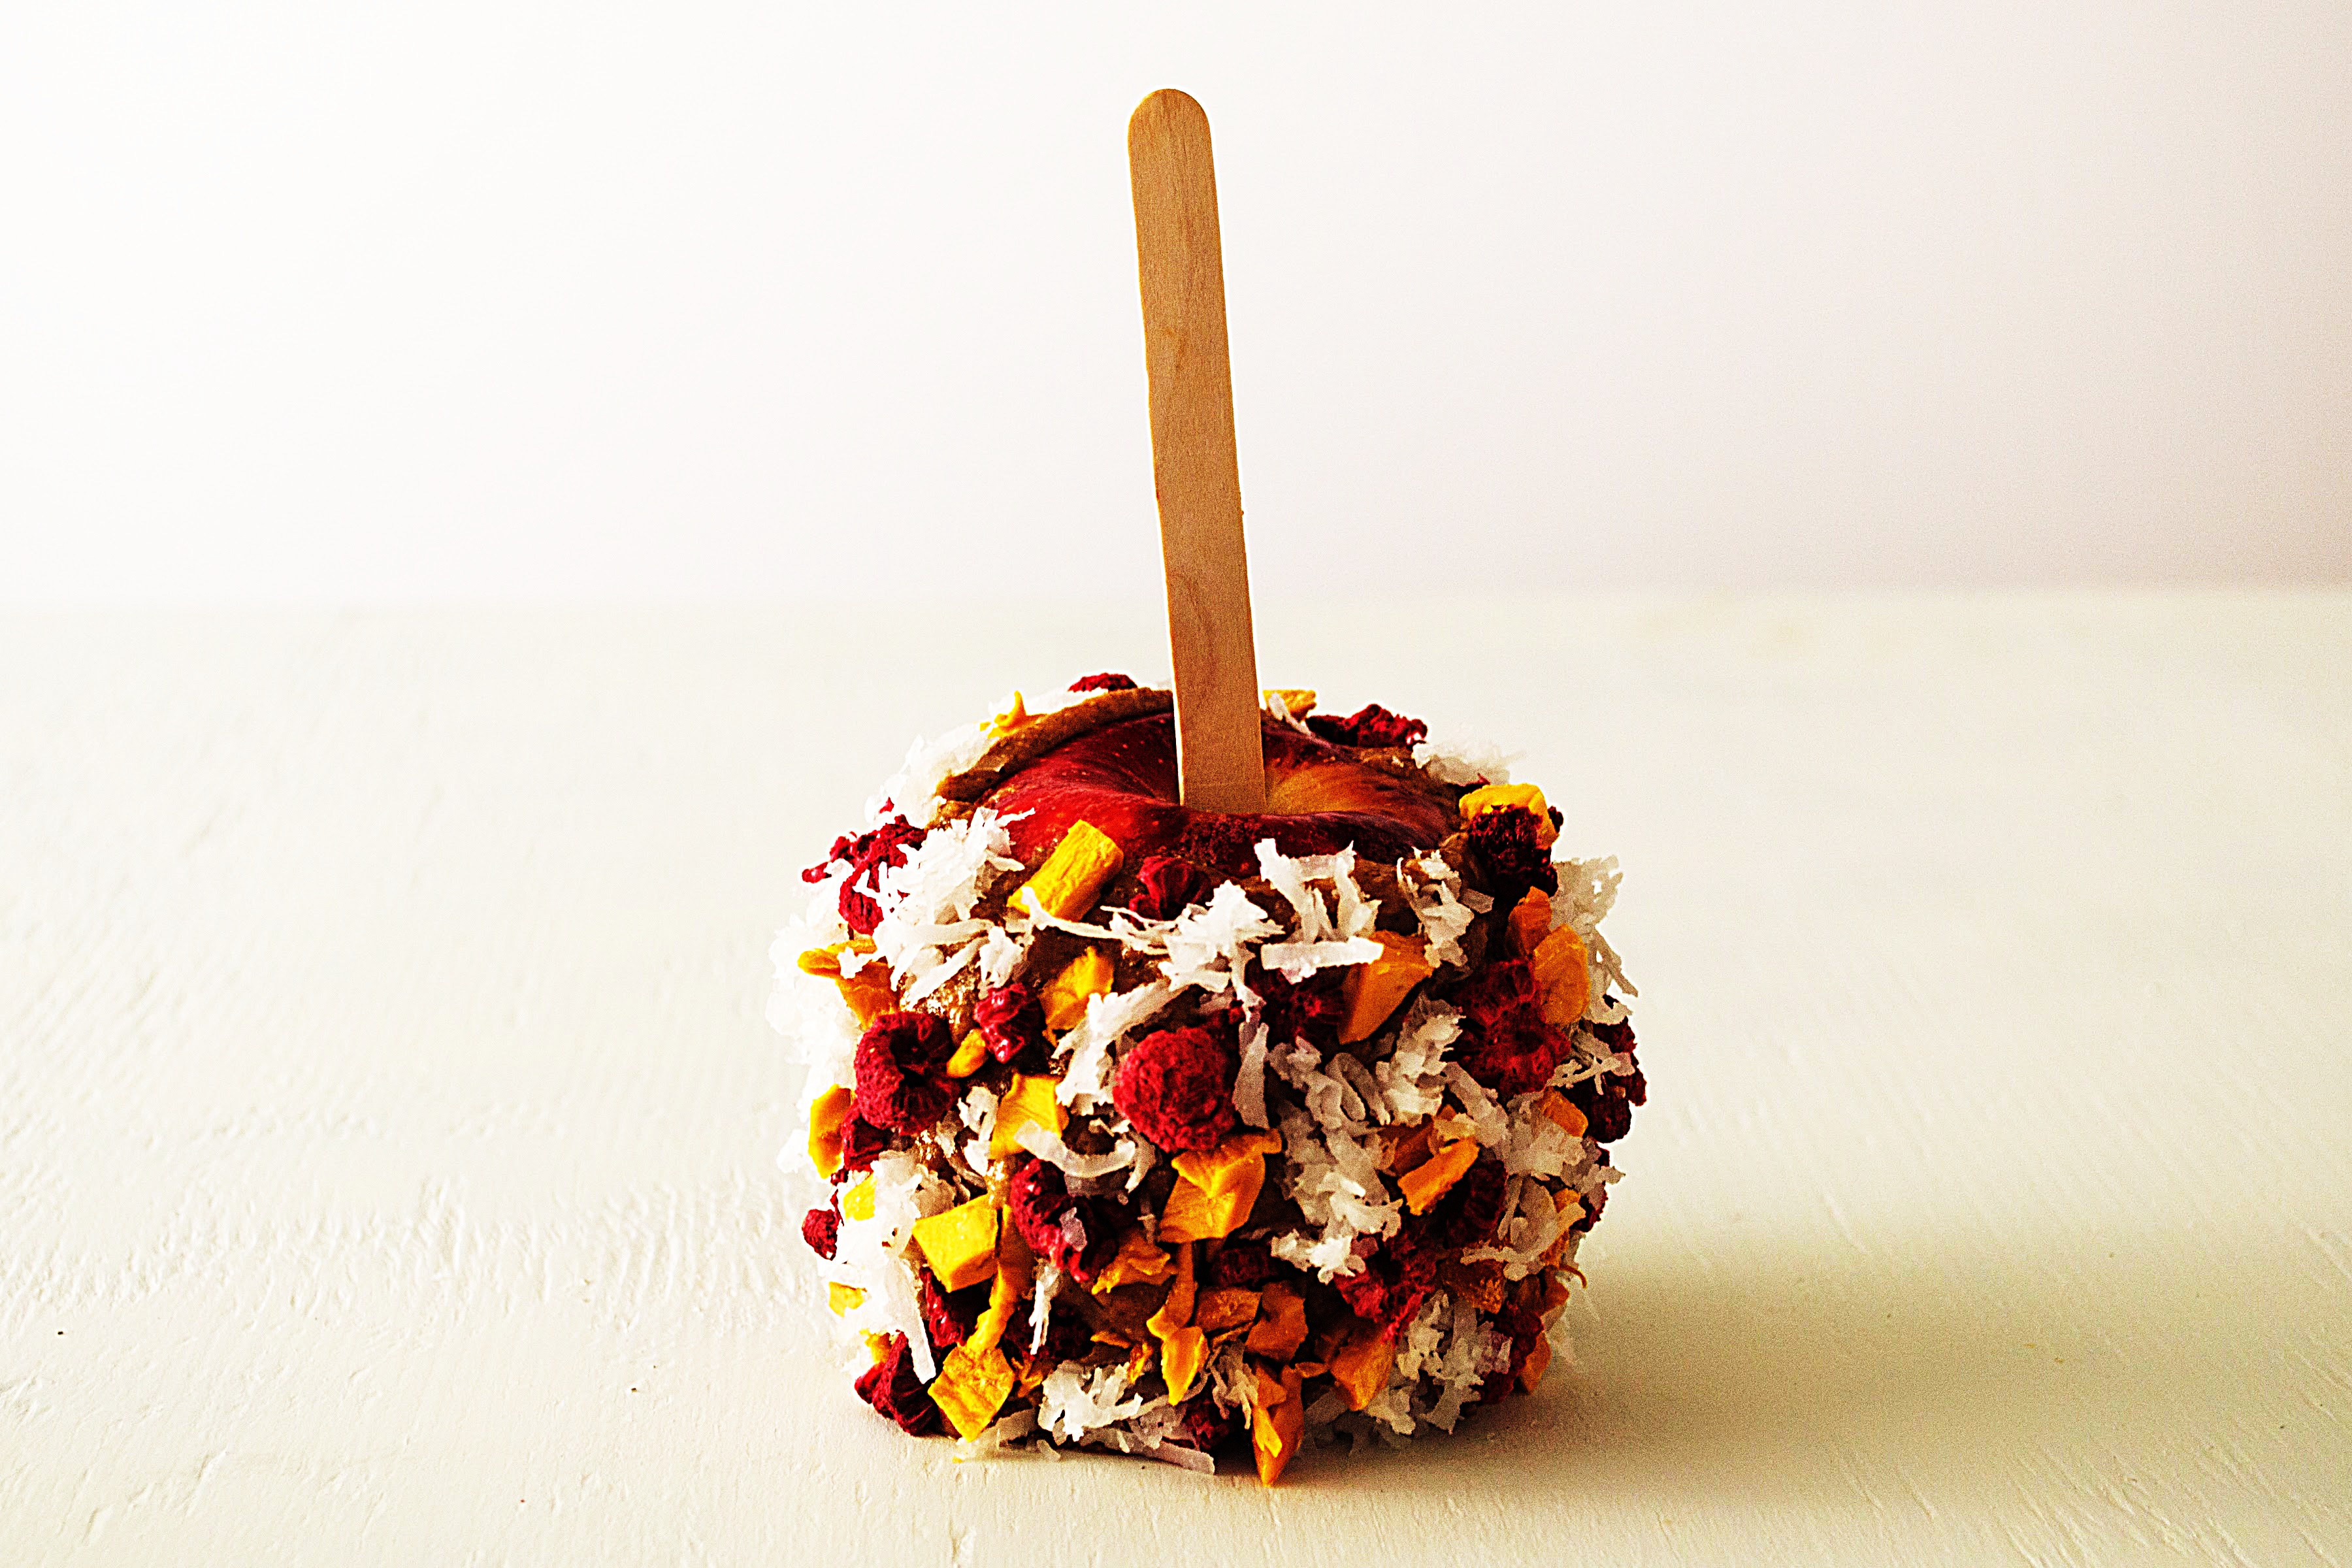 Stupid-Easy Recipe for Mango, Raspberry, and Coconut Caramel Apples (#1 Top-Rated)